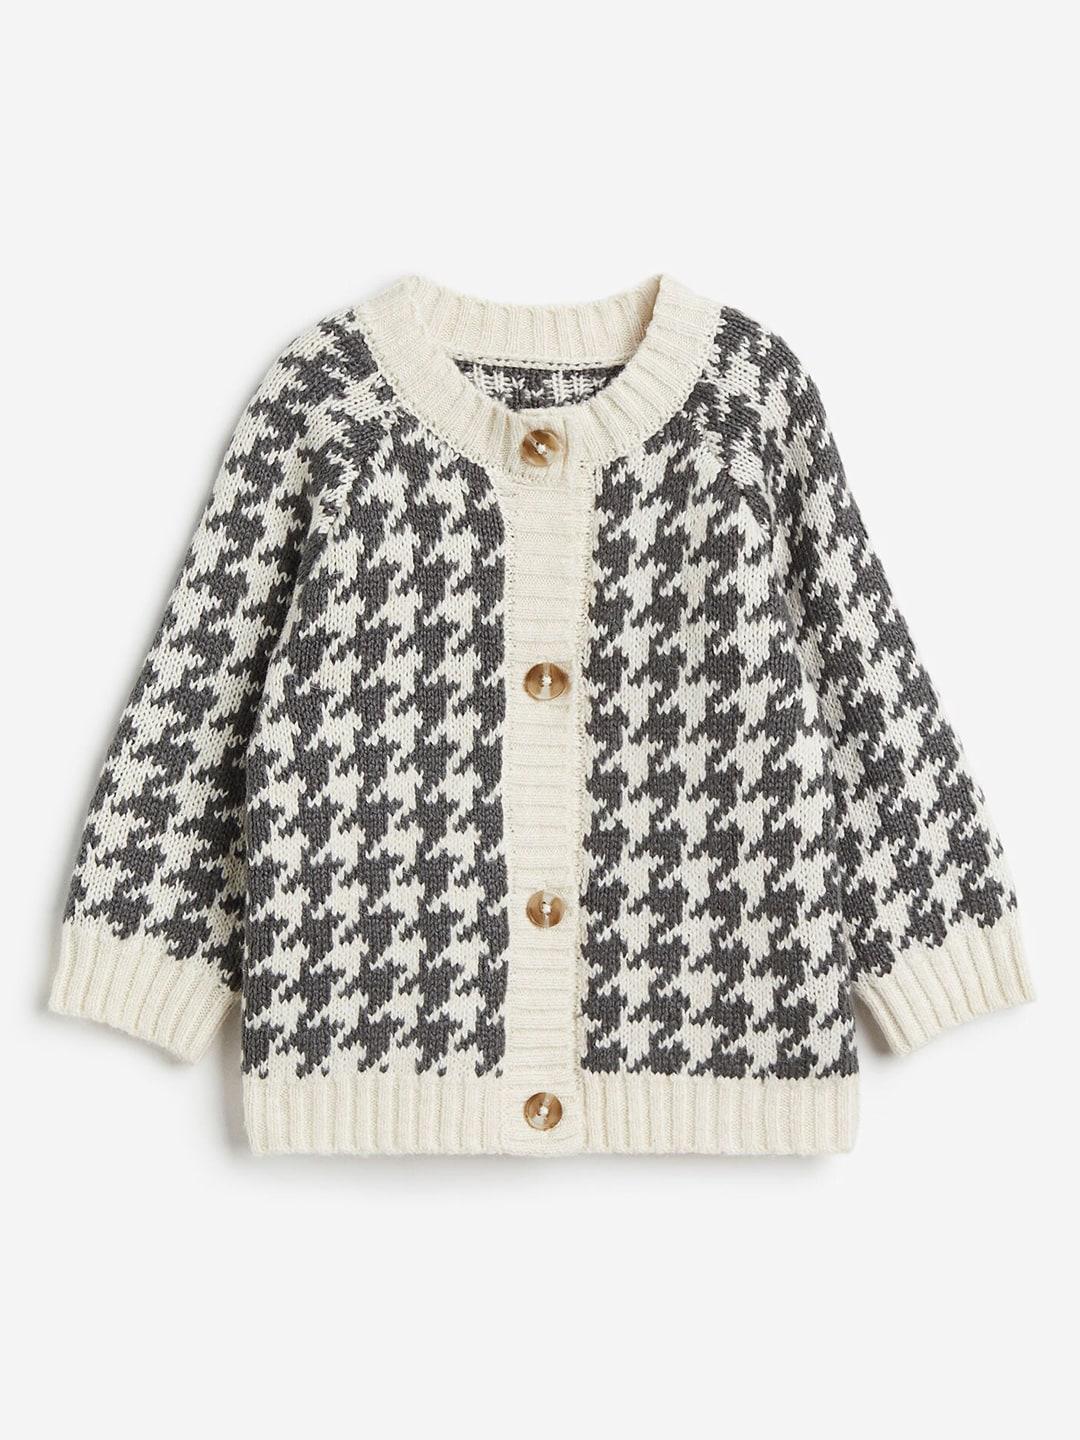 H&M Boys Knitted Cardigan